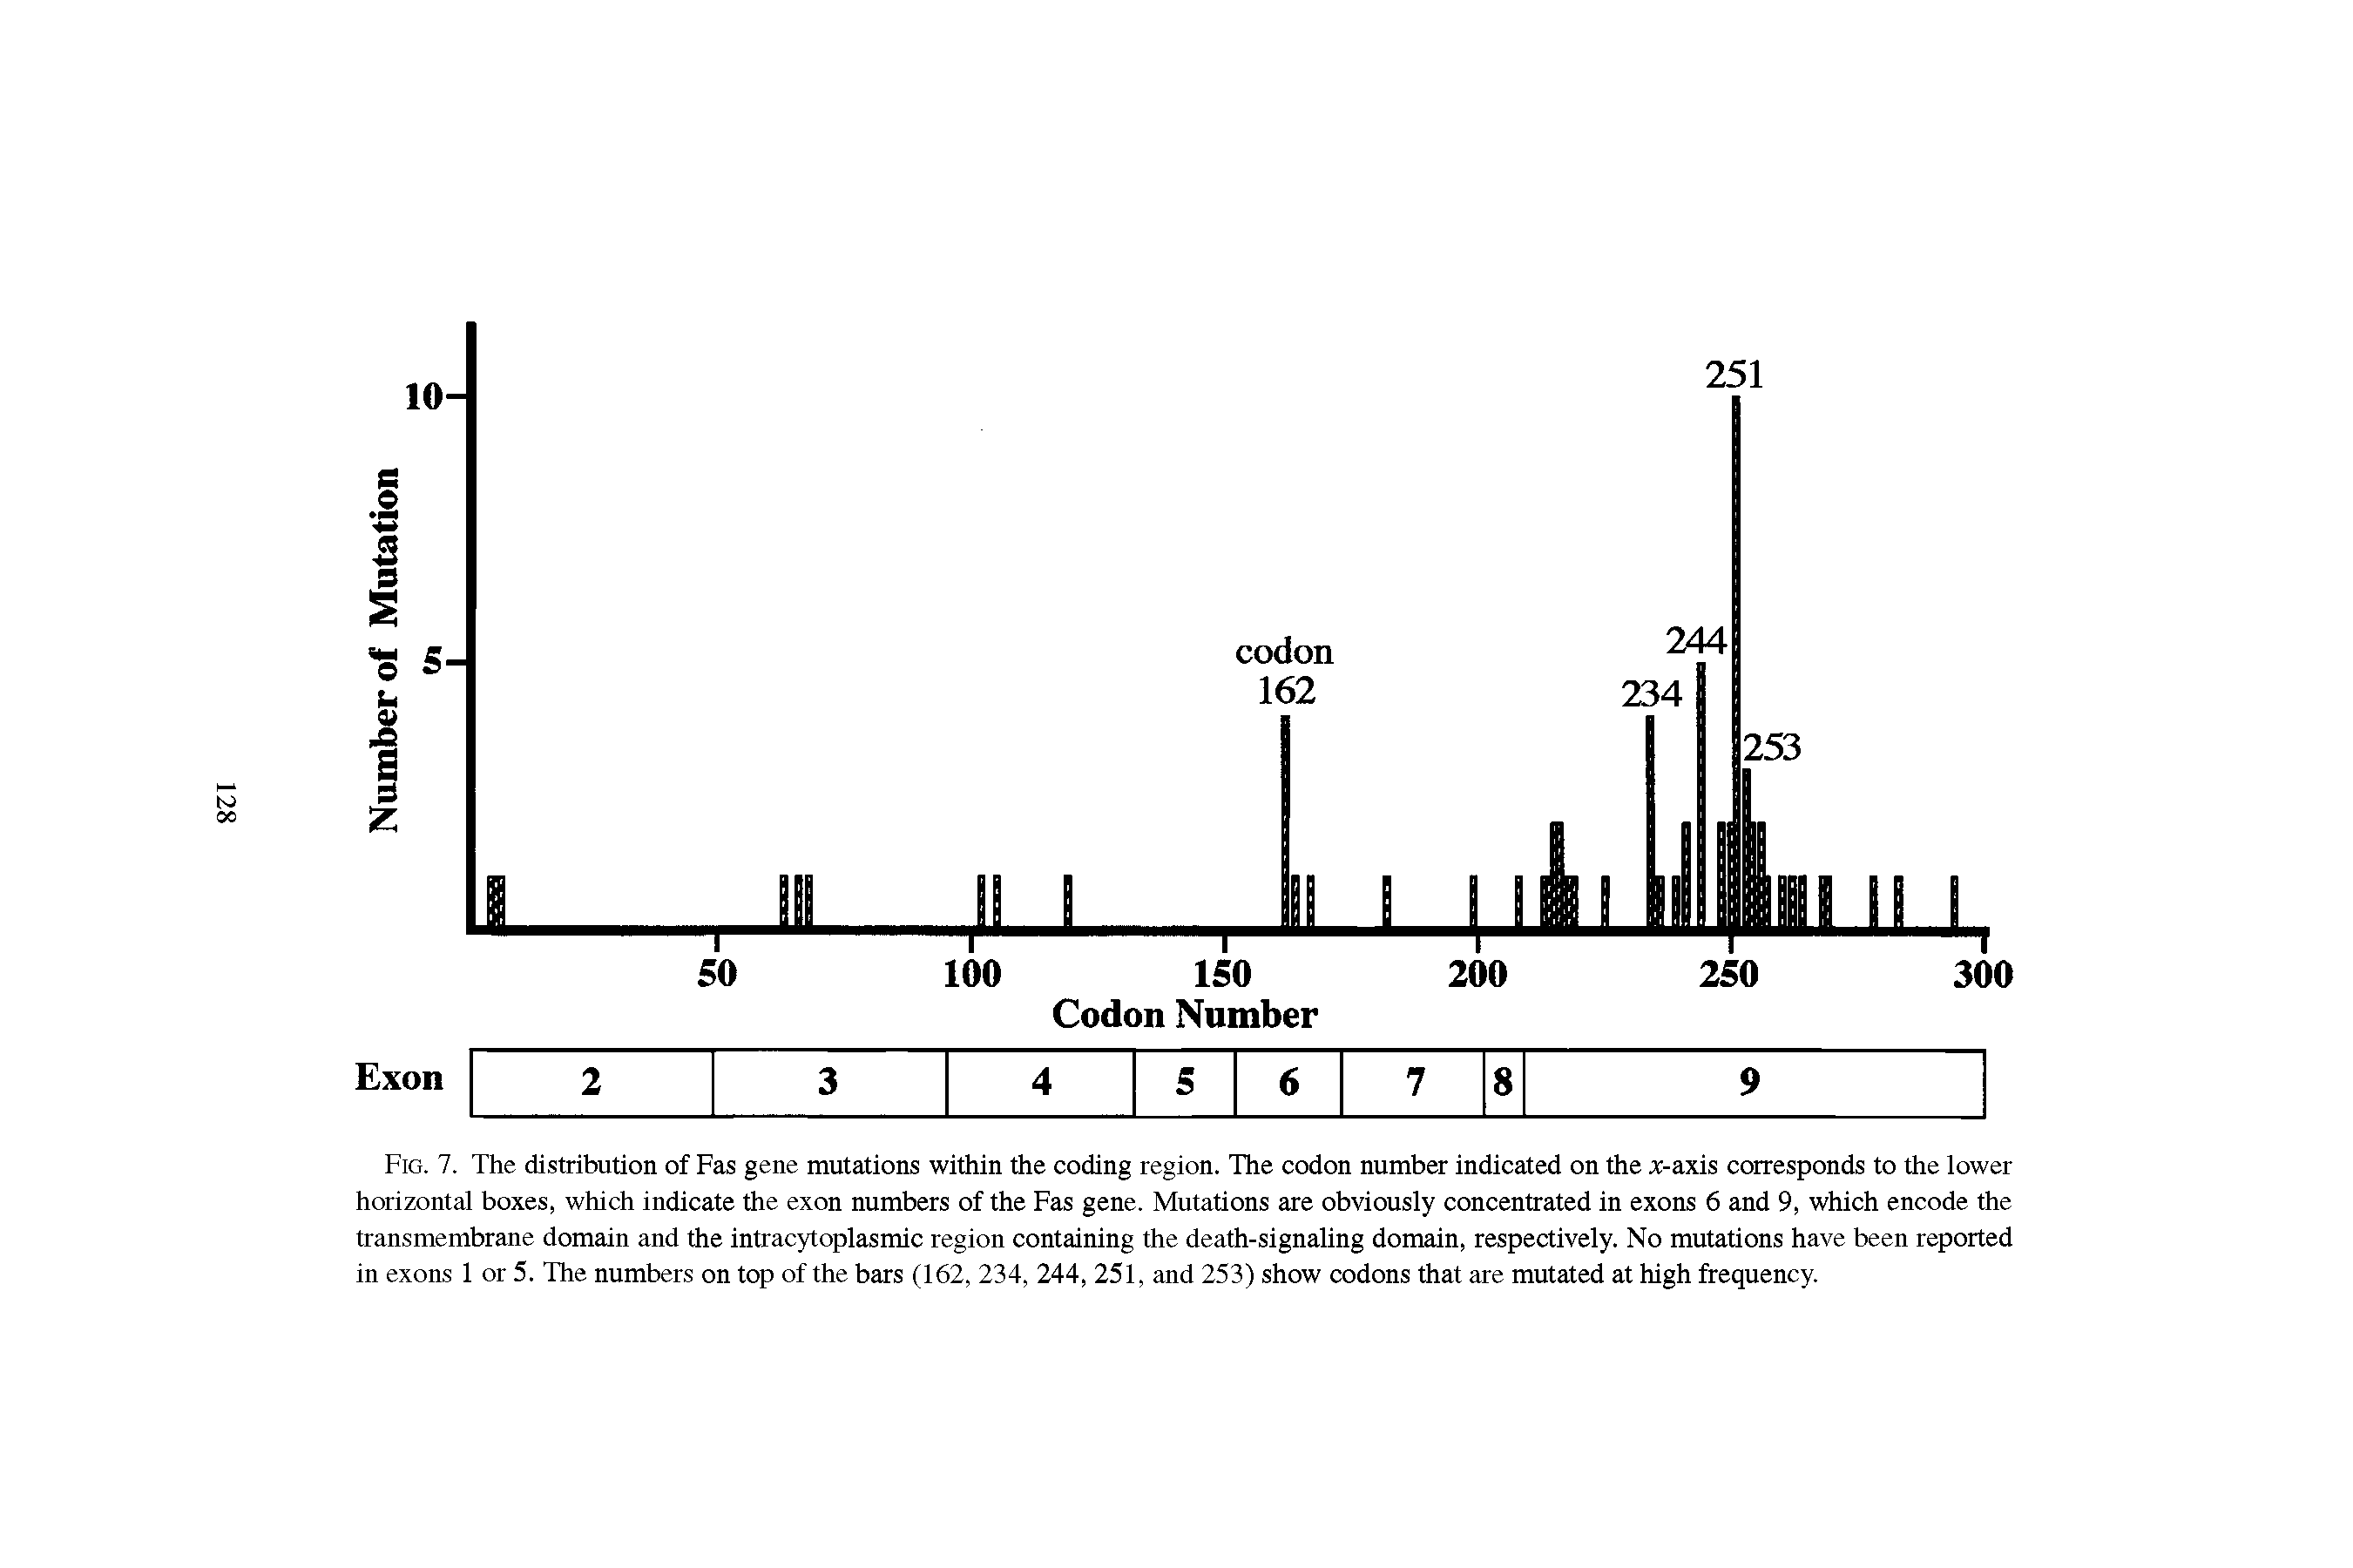 Fig. 7. The distribution of Fas gene mutations within the coding region. The codon number indicated on the x-axis corresponds to the lower horizontal boxes, which indicate the exon numbers of the Fas gene. Mutations are obviously concentrated in exons 6 and 9, which encode the transmembrane domain and the intracytoplasmic region containing the death-signaling domain, respectively. No mutations have been reported in exons 1 or 5. The numbers on top of the bars (162, 234, 244, 251, and 253) show codons that are mutated at high frequency.